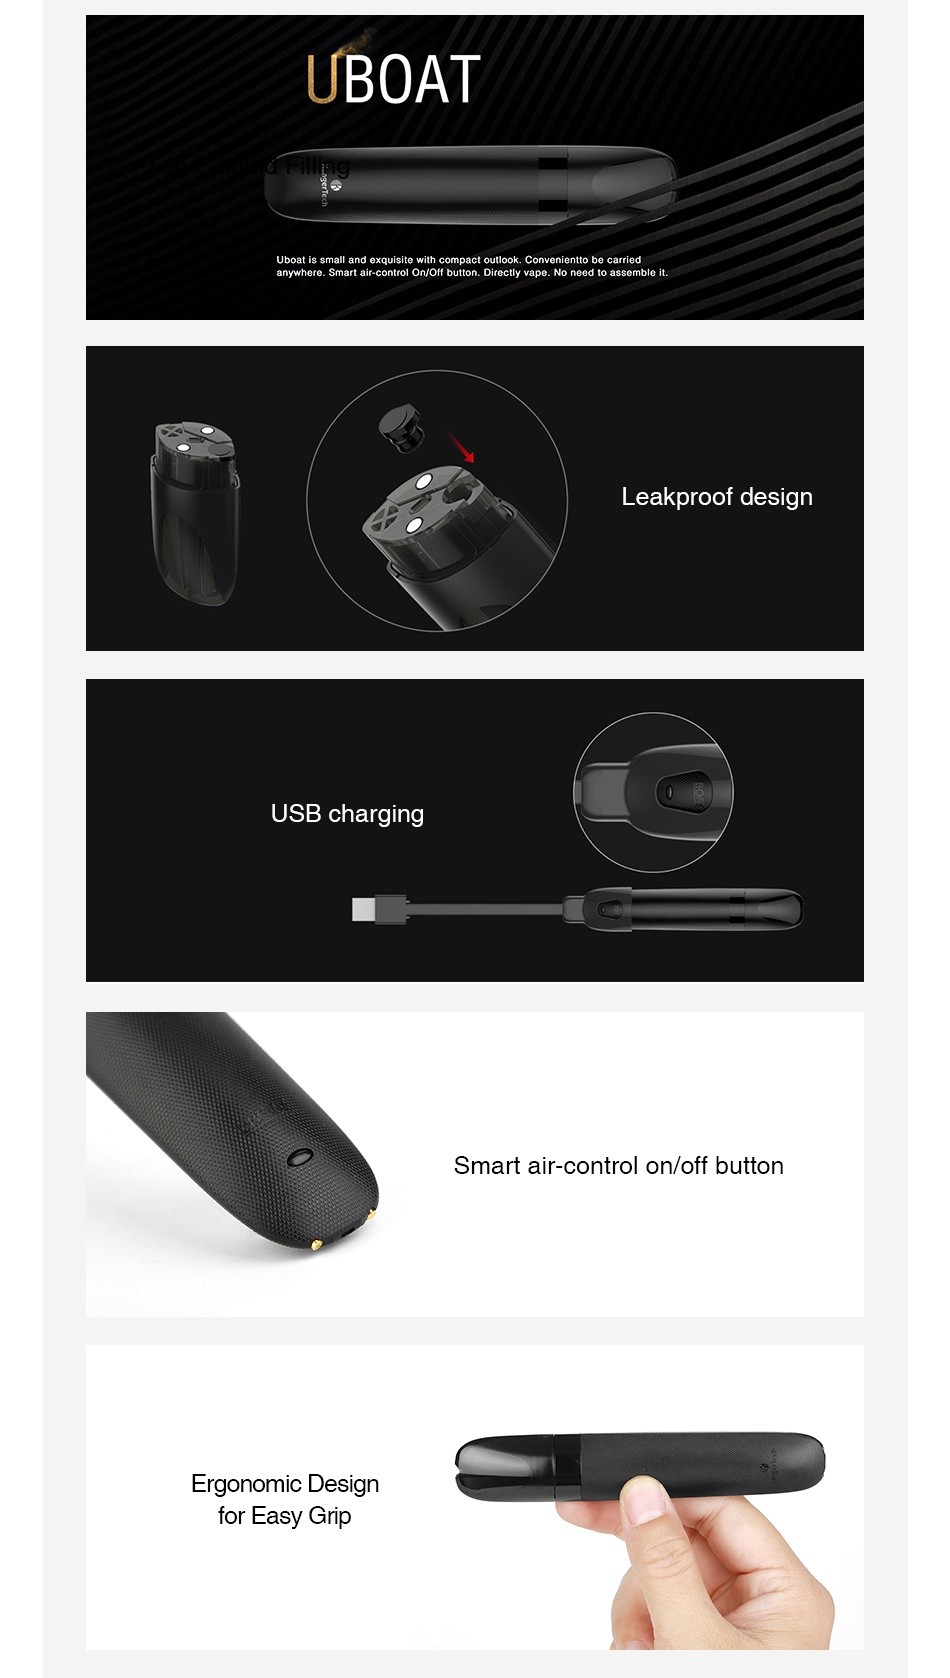 Kangertech Uboat Starter Kit 550mAh UBOAT boat is small and exquisite with compact outlook  Convenientto be carried anywhere  Smart air control On Off button  Directly vape  No need to assemble it Leakproof design USB charging Smart air control on off button Ergonomic Design for Easy Grip